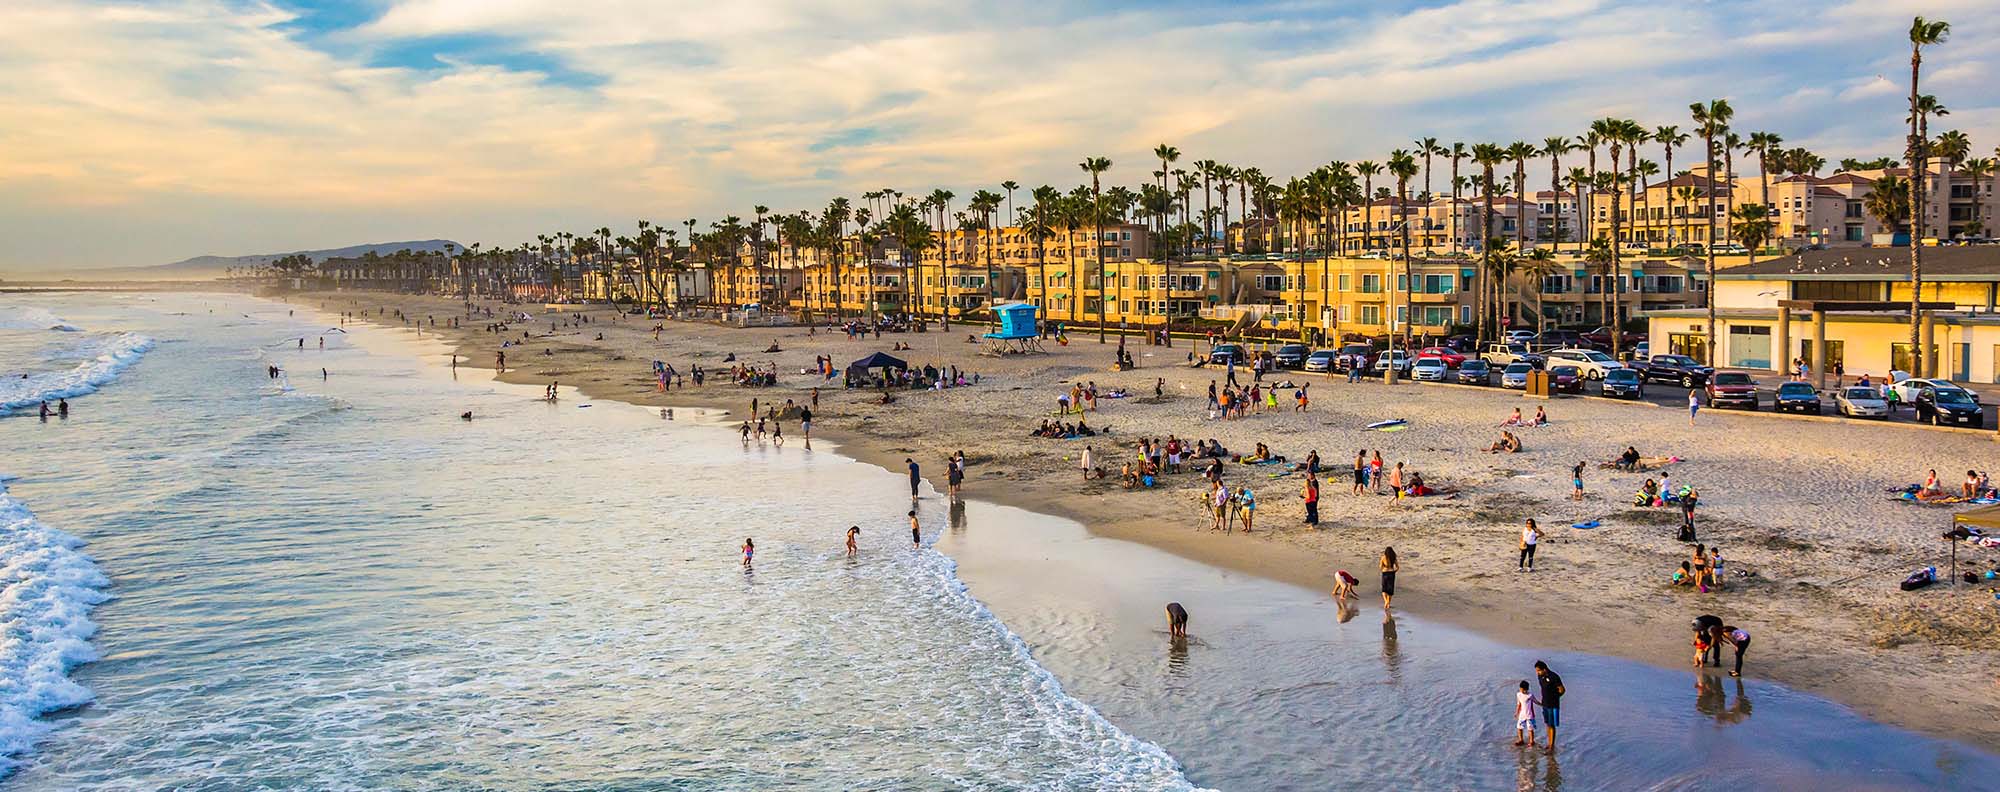 Why San Diego is One of the Most Charitable Regions